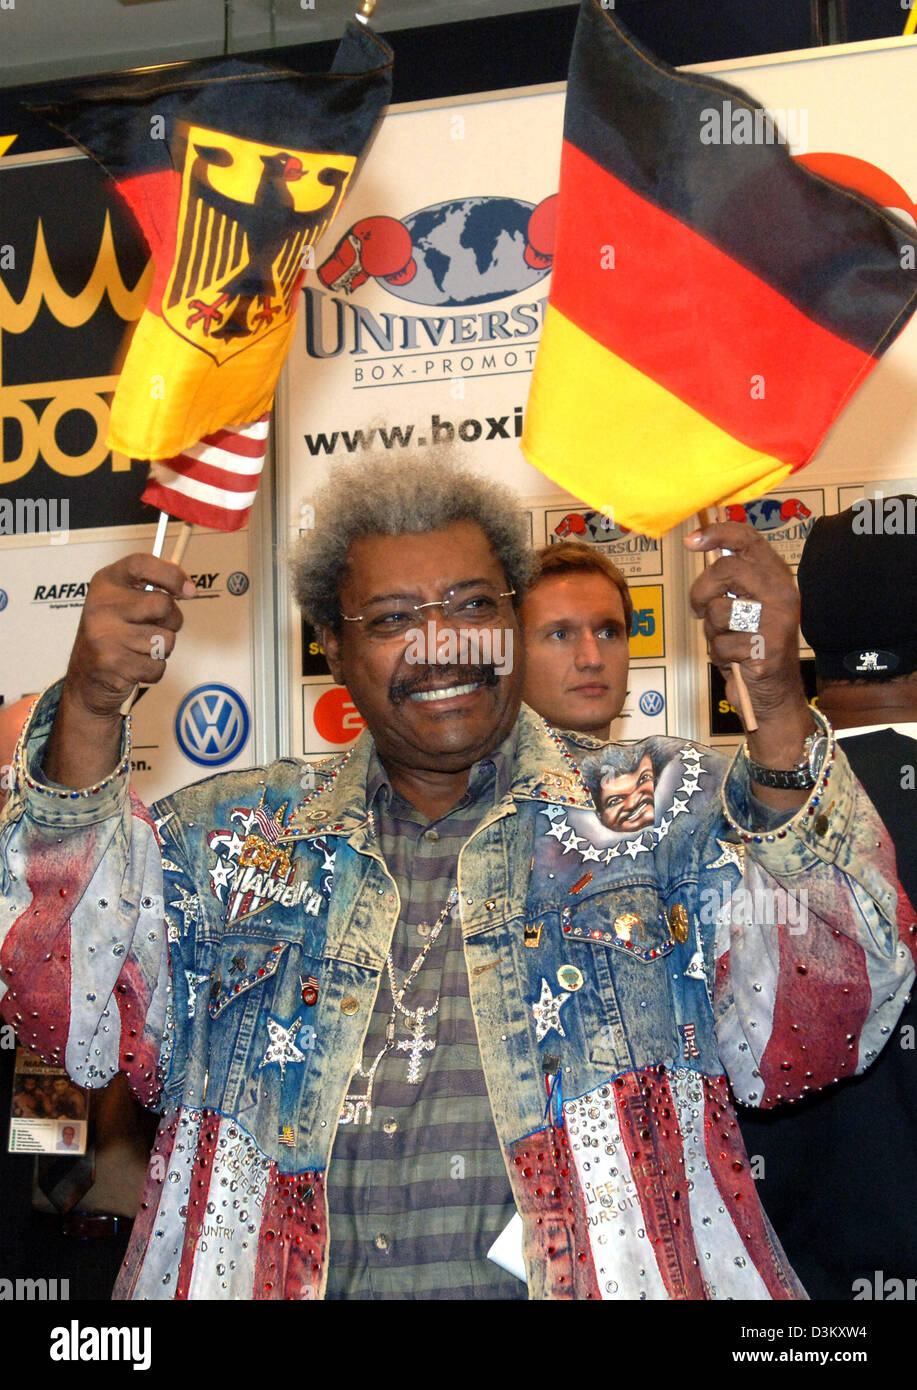 (dpa) - US boxing promoter Don King smiles and waves with the national flags of Germany and the US in Hamburg, Germany, Tuesday, 27 September 2005. In honour of the late German boxing legend Max Schmeling, who would have turned 100 on Wednesday, 28 September 2005, challenger Luan Krasniqi is going to fight US boxing pro and world champion Lamon Brewster for the WBO world champion t Stock Photo